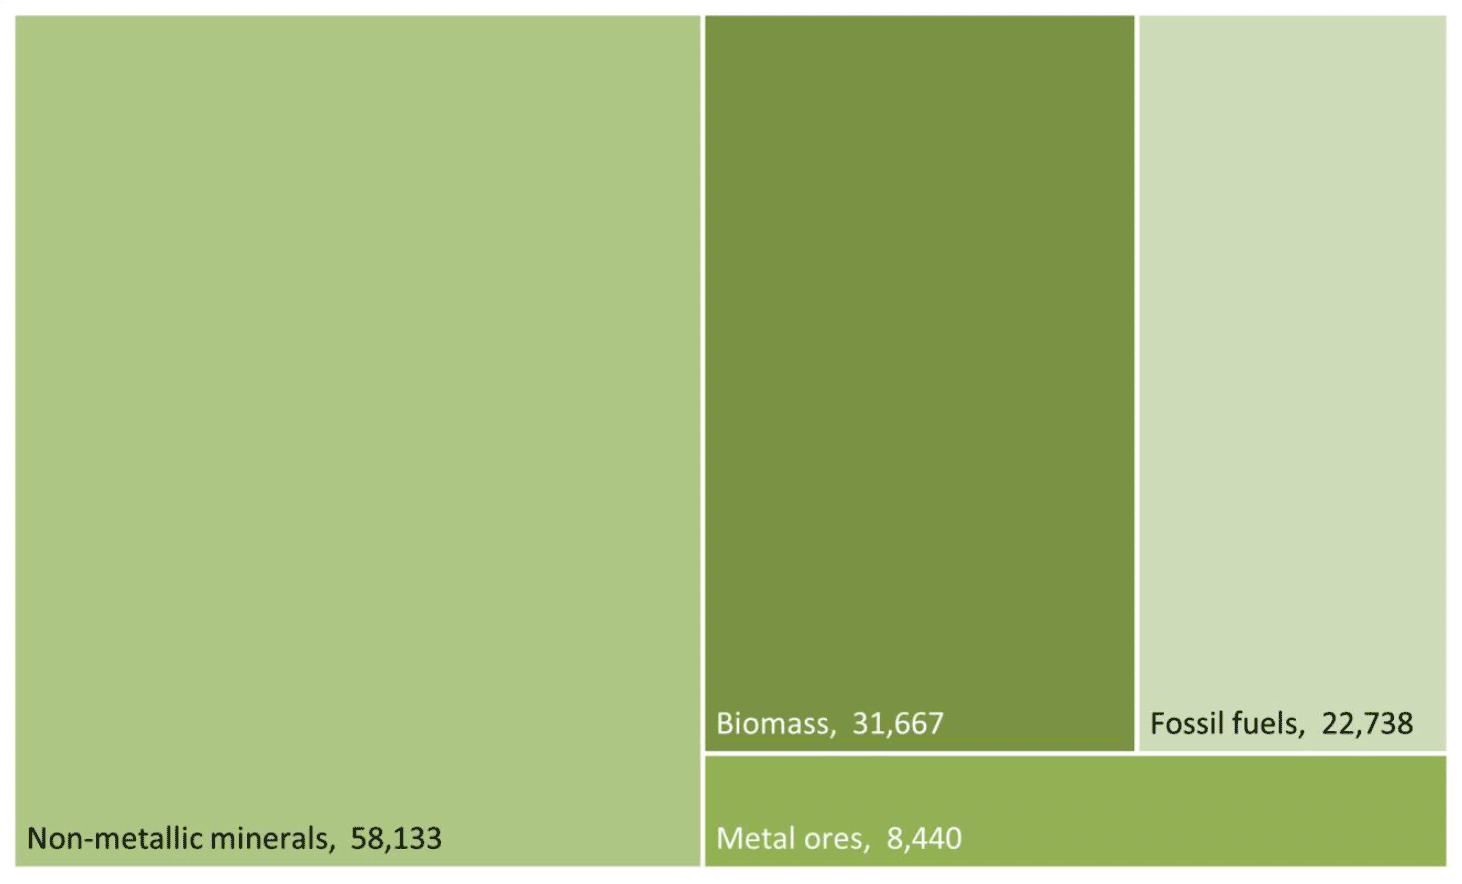 Treemap chart, showing the size of the categories in relation to each other by rectangles of proportionate size. There are four categories; non-metallic minerals, biomass, fossil fuels and metal ores. 